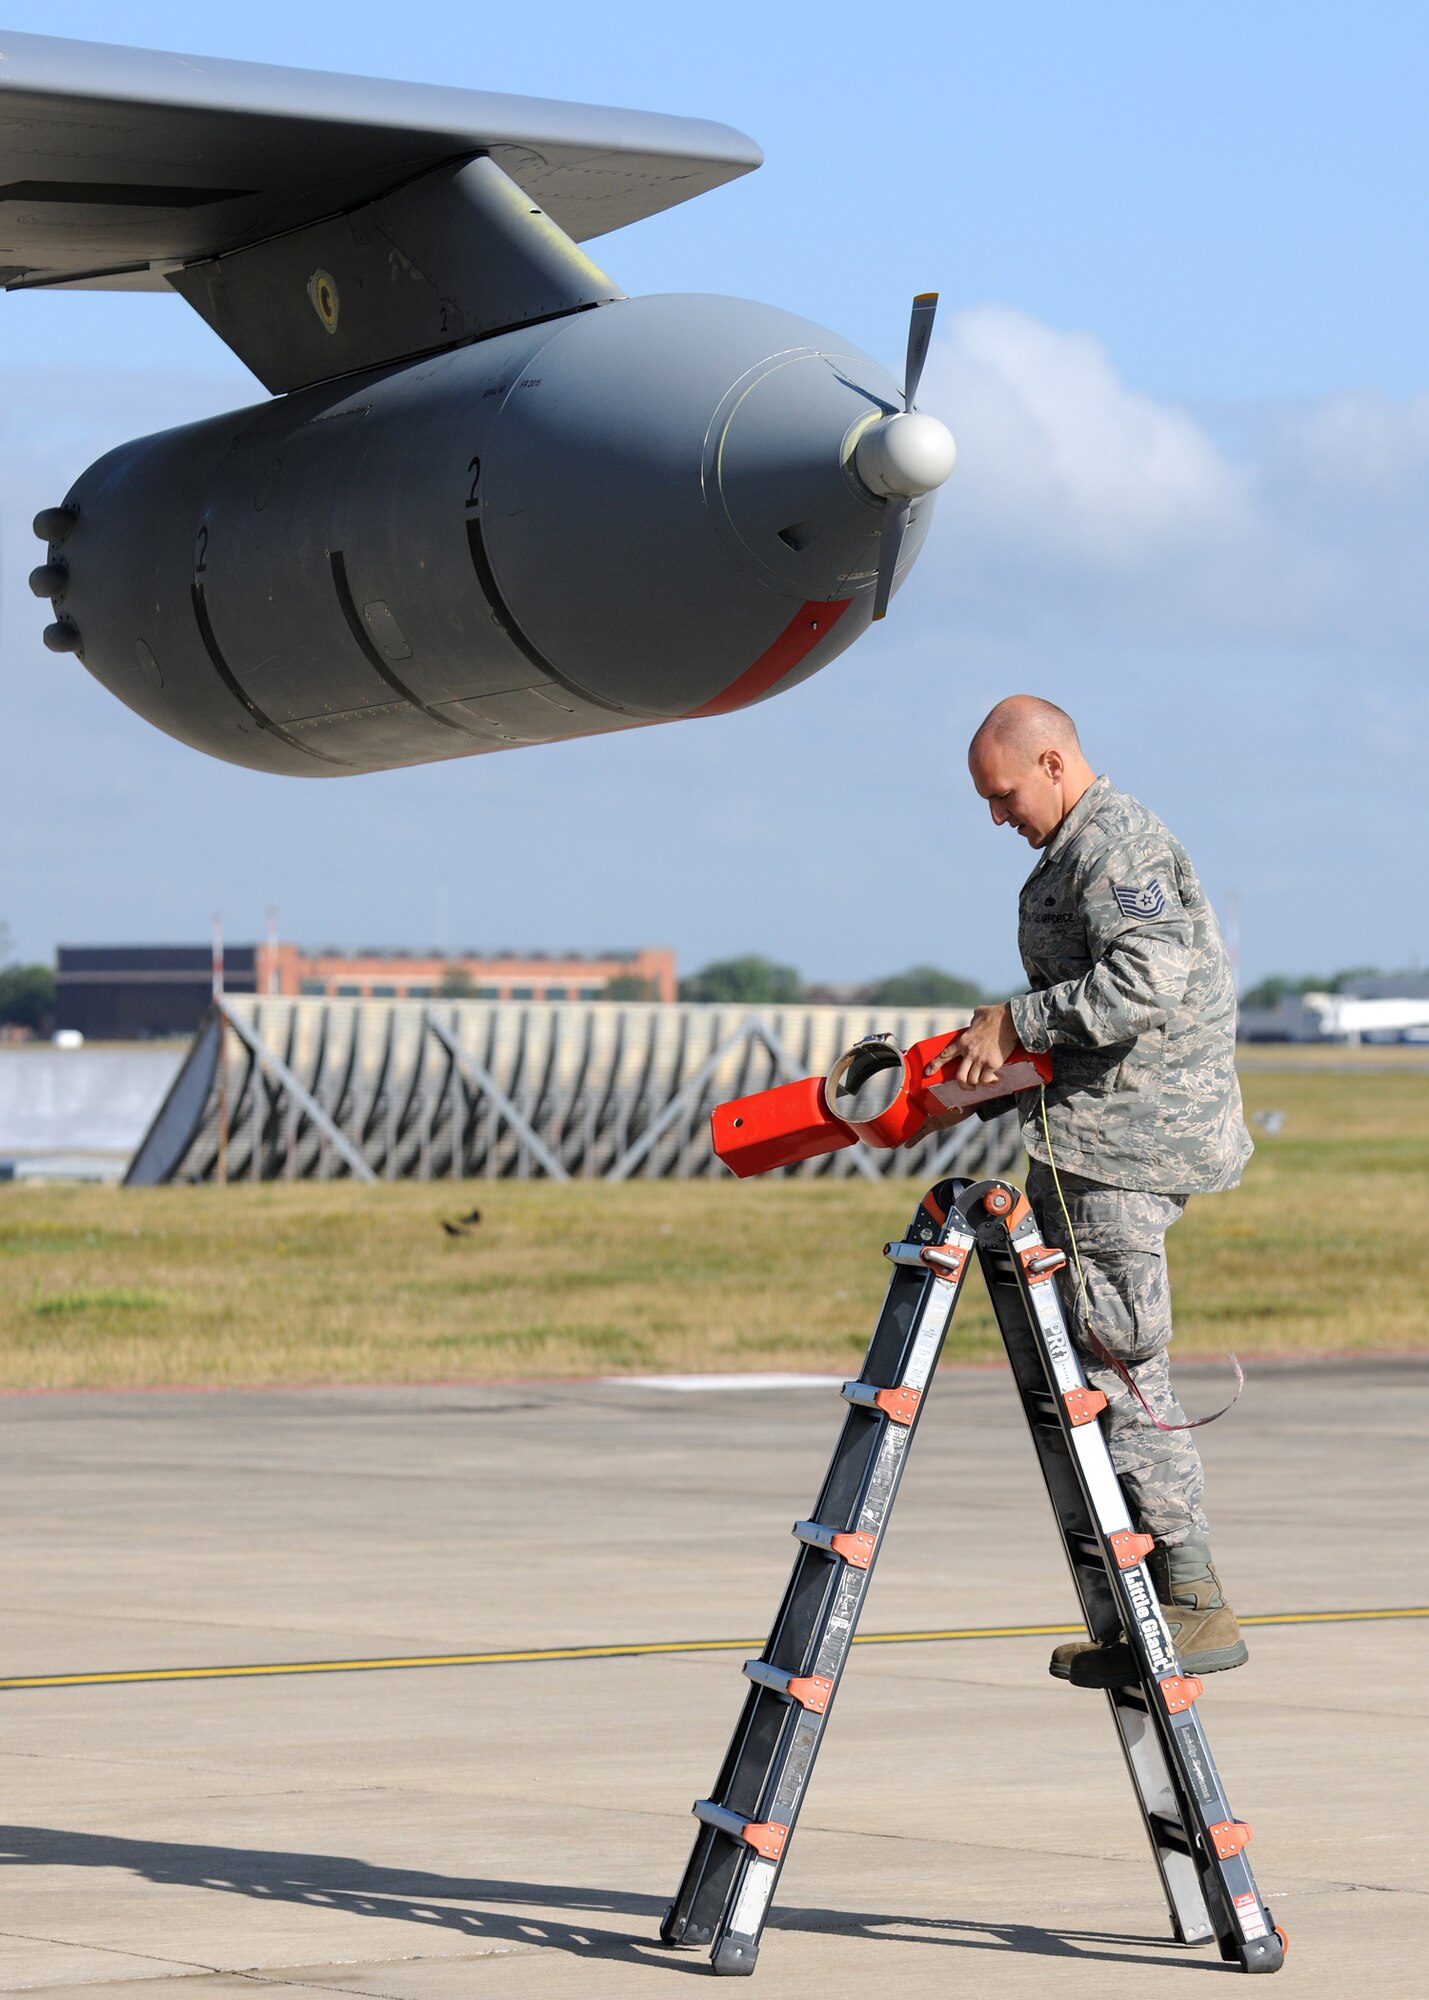 RAF MILDENHALL, England – Tech. Sgt. Adam Hagar, 100th Aircraft Maintenance Squadron crew chief, removes the cover from a multi point refueling system during prelaunch preparations in support of the Allied Strike exercise Aug. 5. Allied Strike is Europe’s premier annual close air support exercise that helps build partnership capacity among allied NATO nations and joint services. (U.S. Air Force photo/ Staff Sgt. Jerry Fleshman)